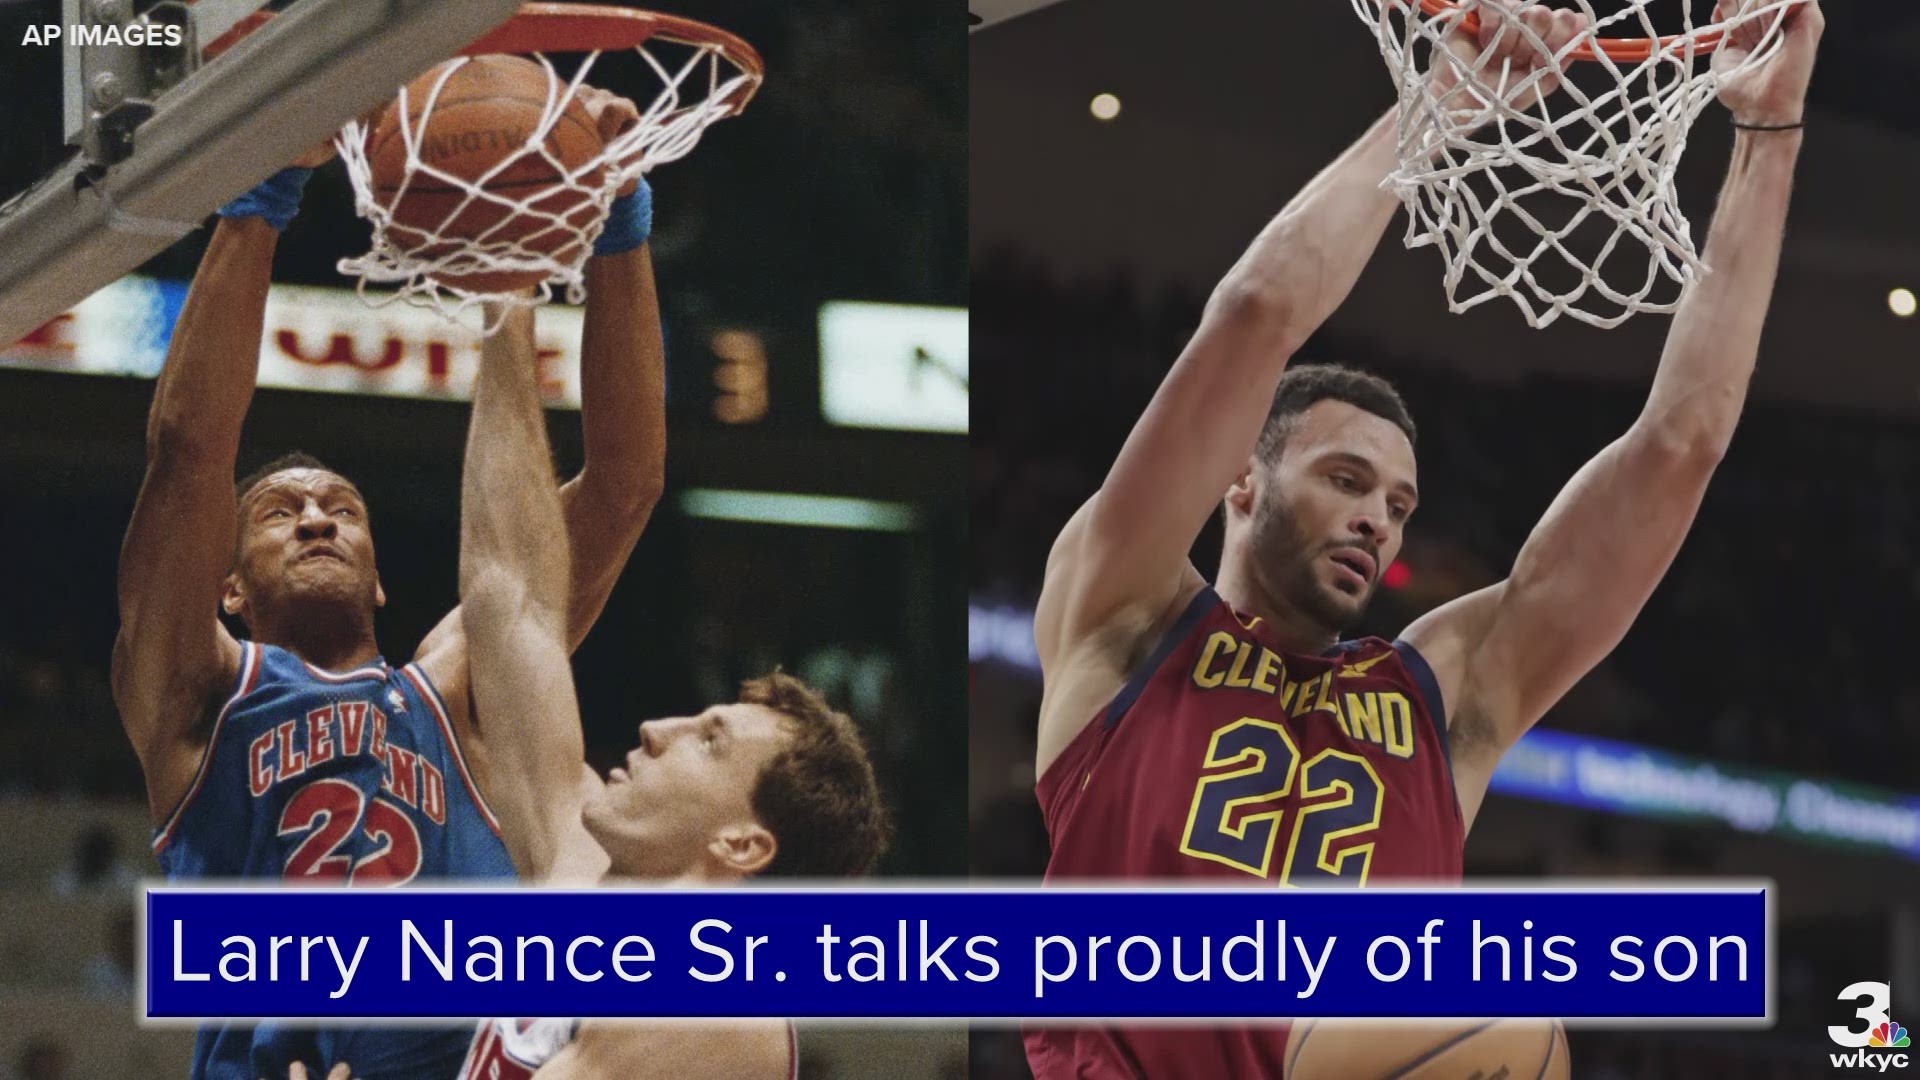 Larry Nance Jr. in the Slam Dunk Contest makes father-son history